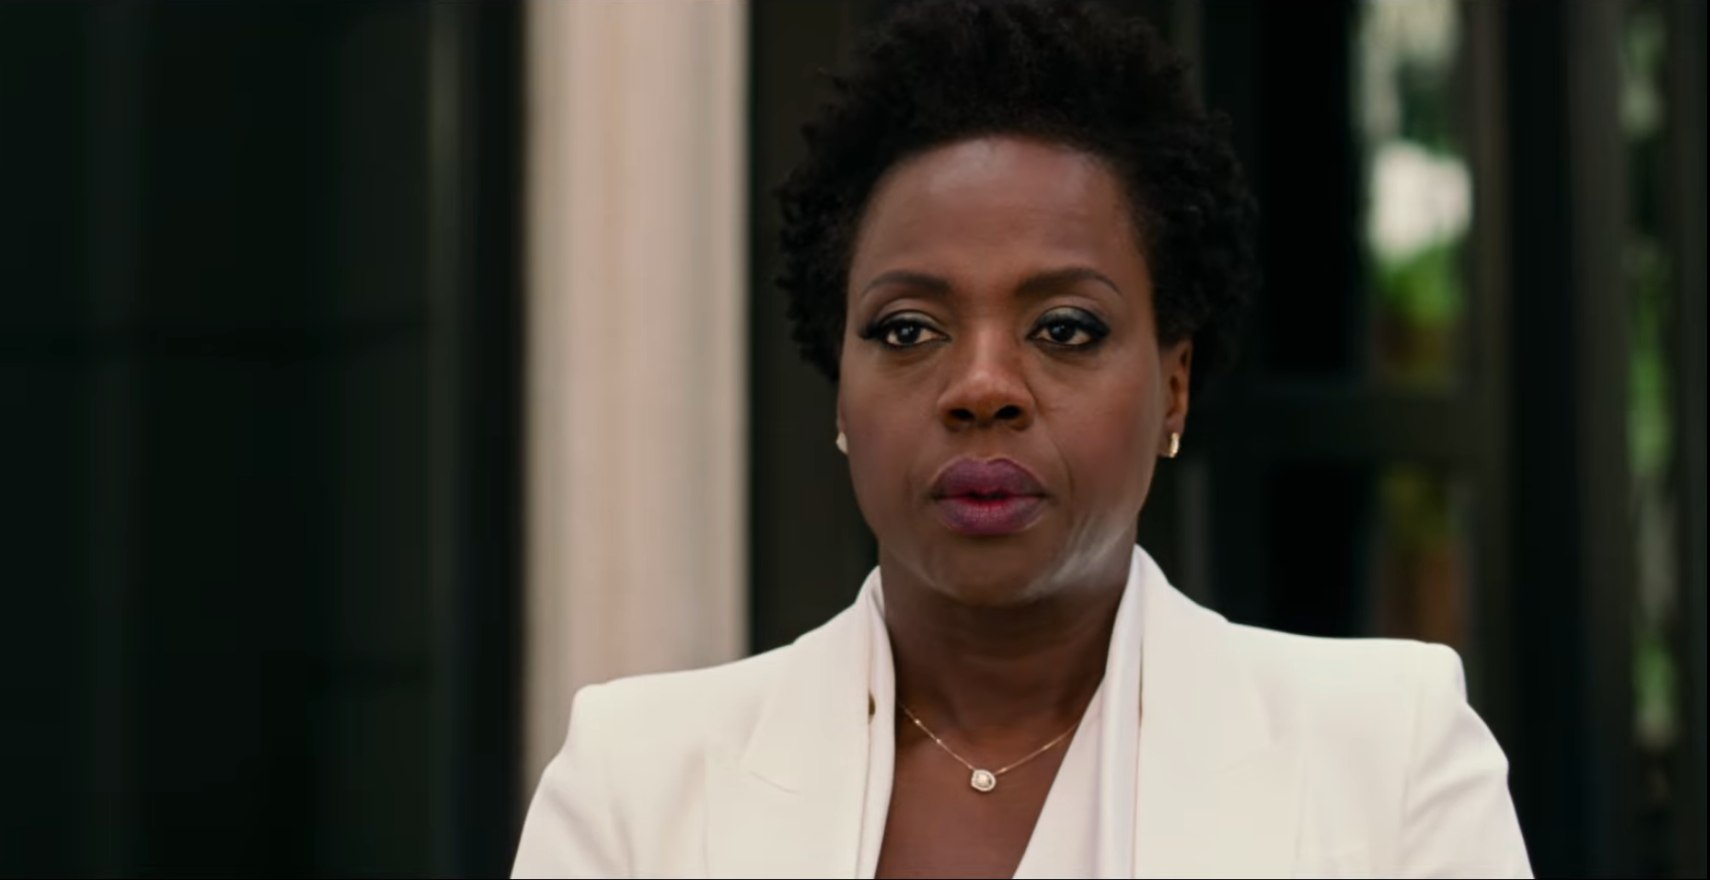 The Trailer For 'Widows' Is Here So Let's Go Ahead And Give Viola Davis And Steve McQueen All The Awards
